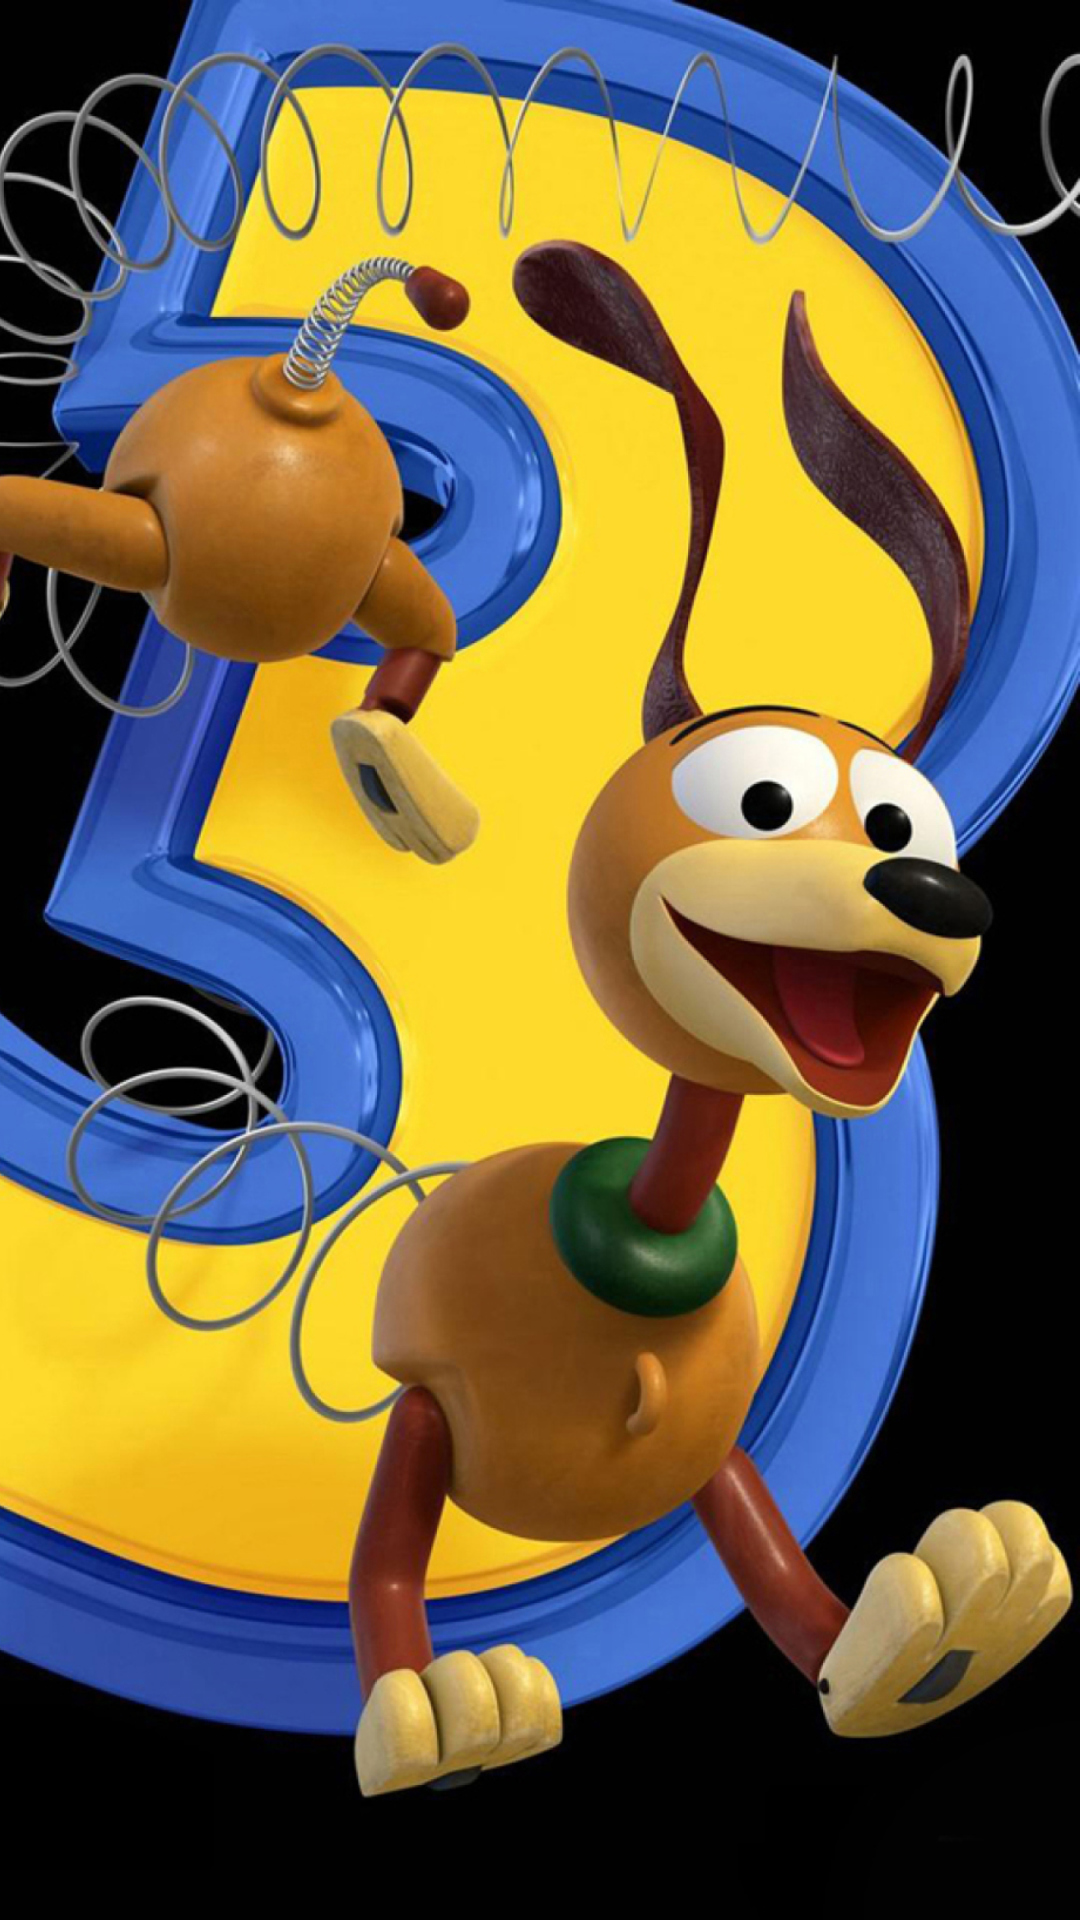 Dog From Toy Story 3 screenshot #1 1080x1920